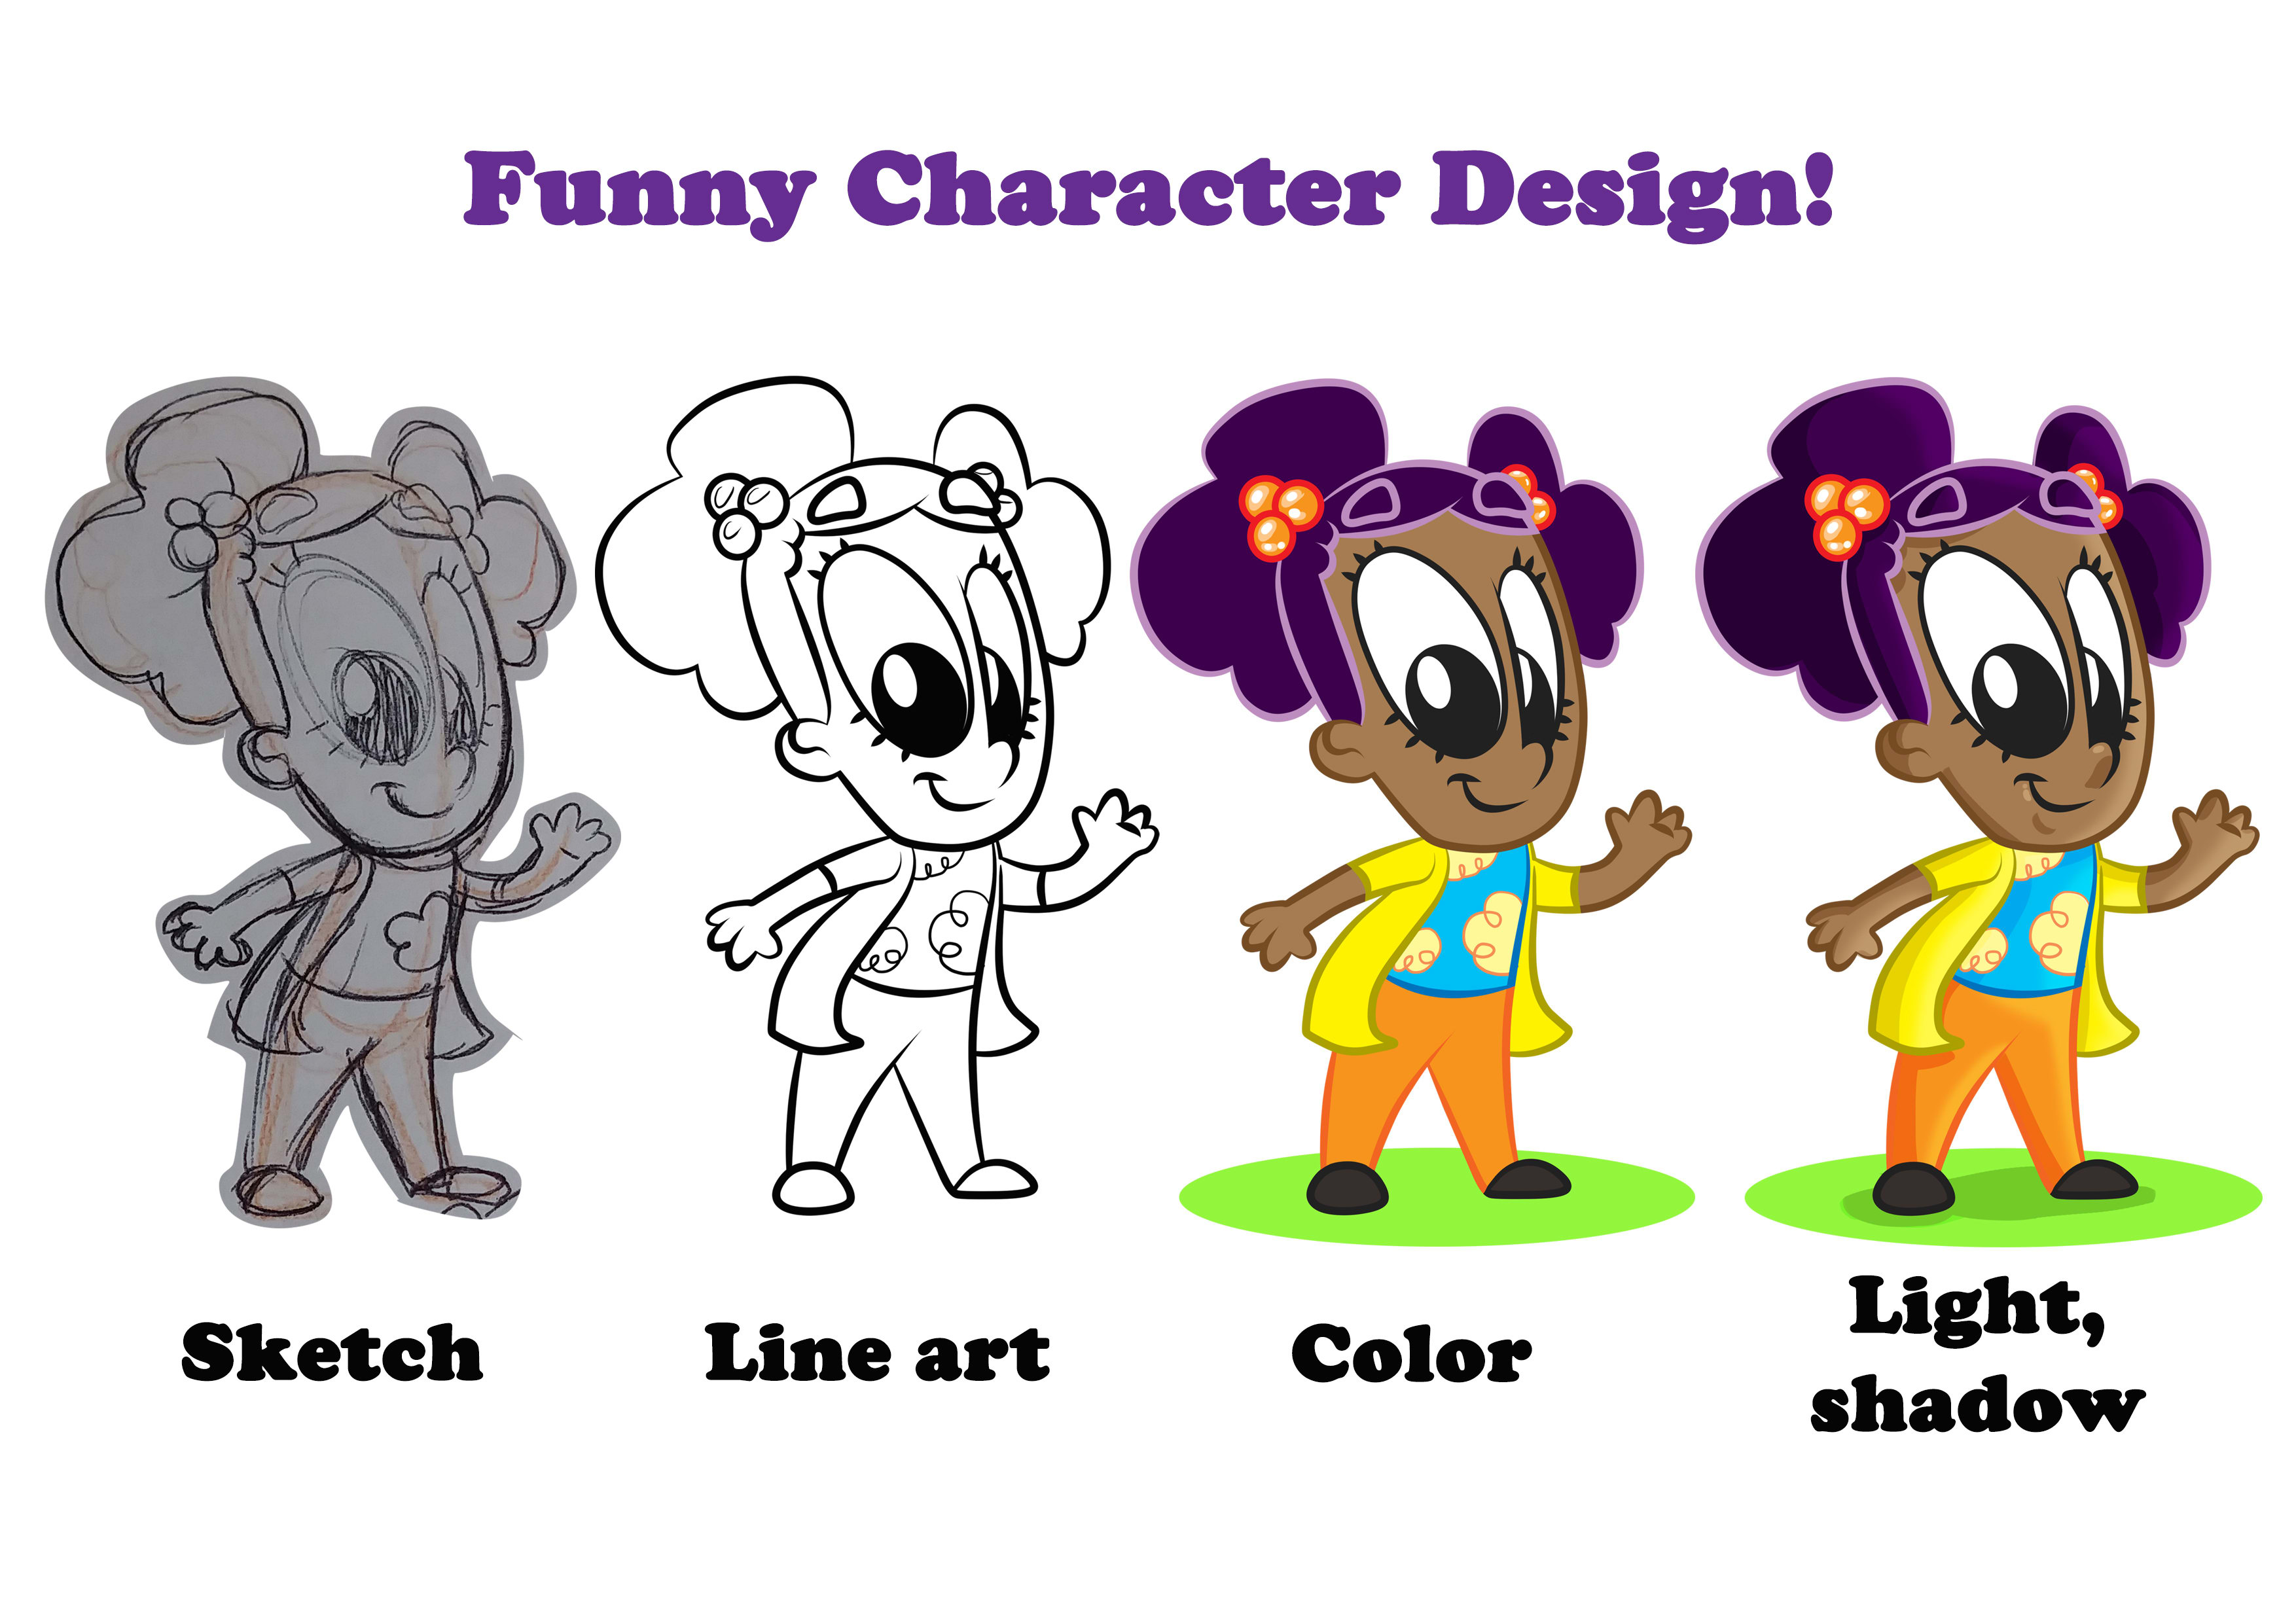 Draw character design in cartoon style by Michi_mart | Fiverr